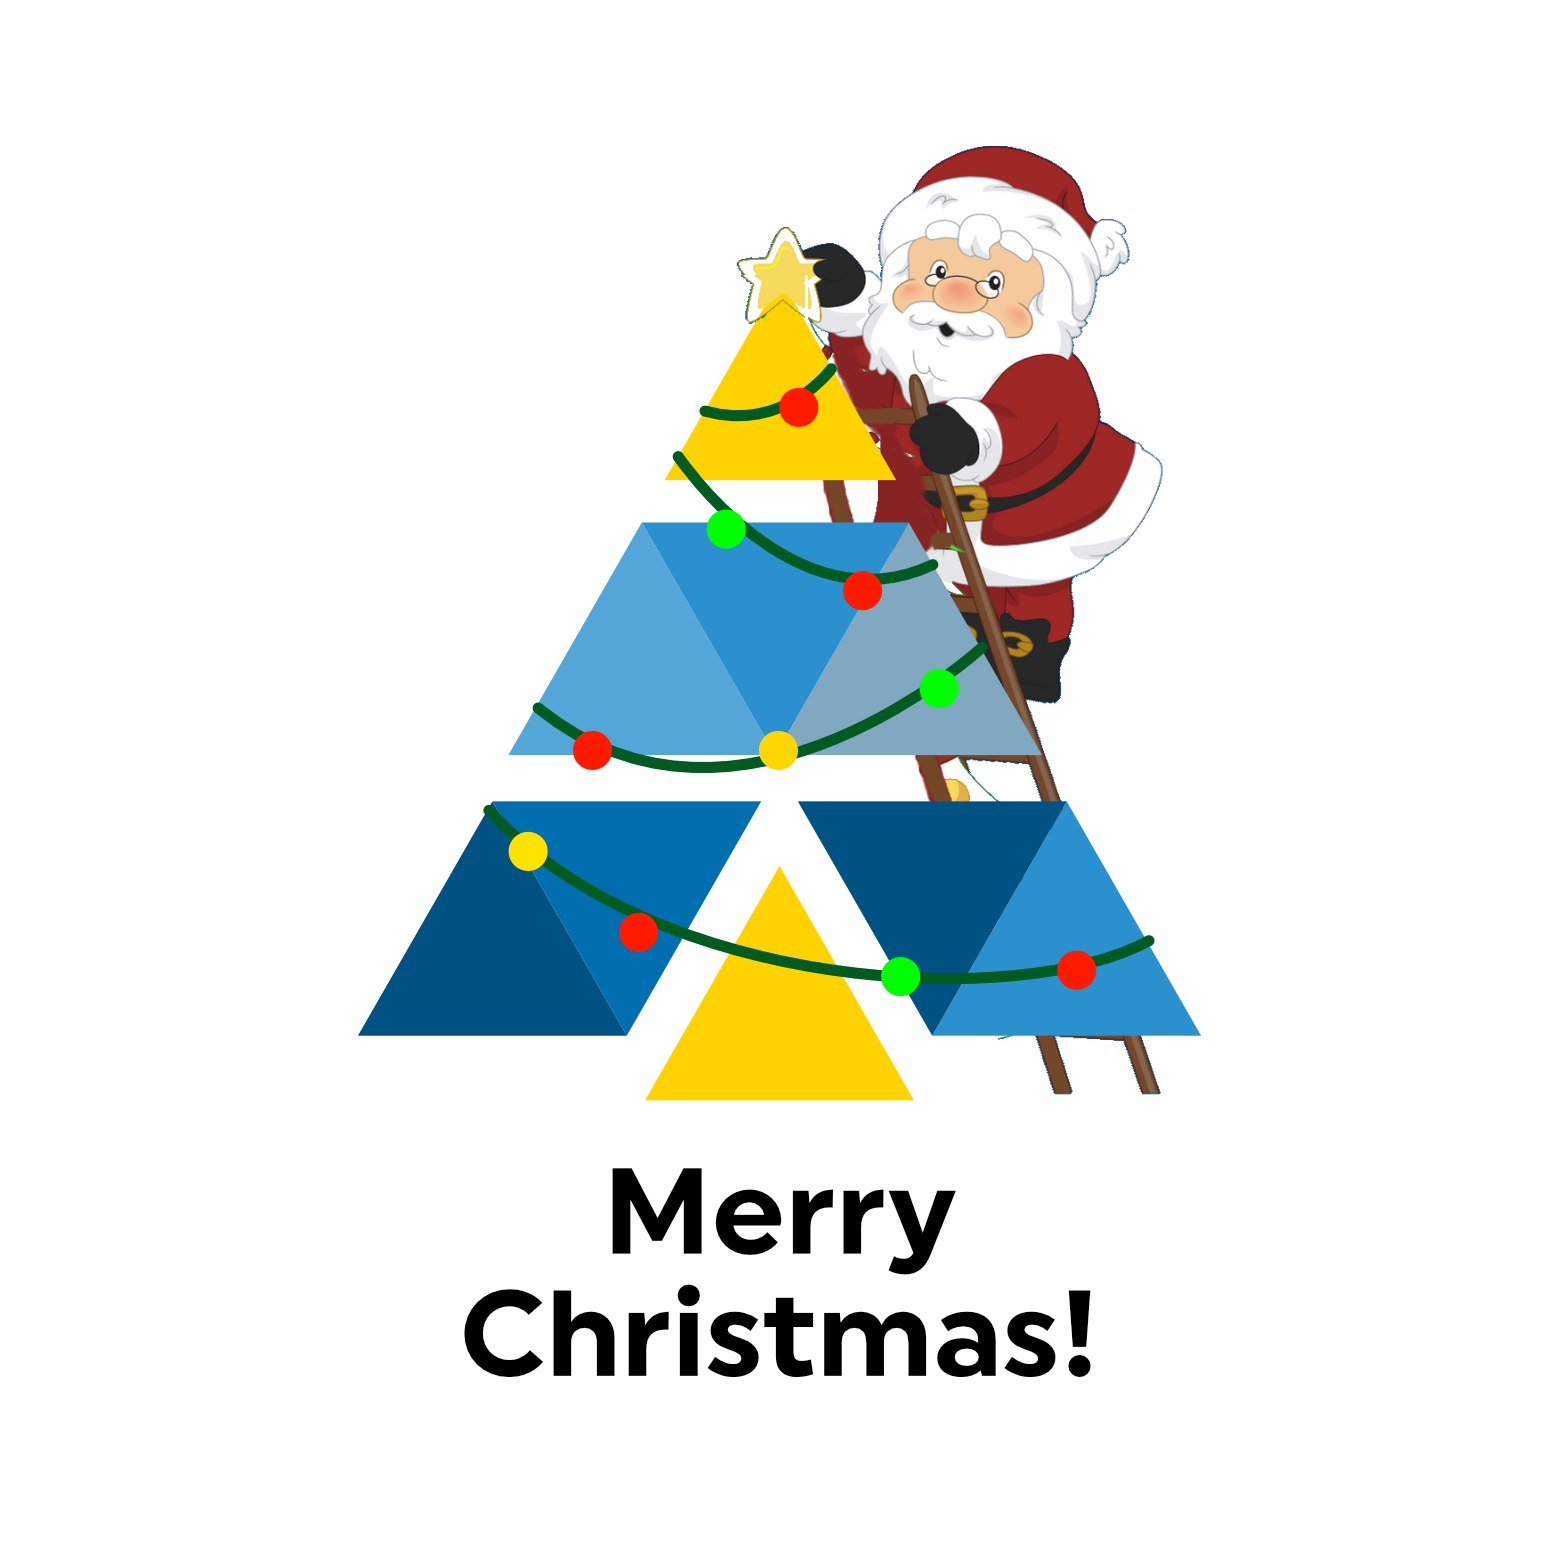 Merry Christmas From everyone at Key Technologies